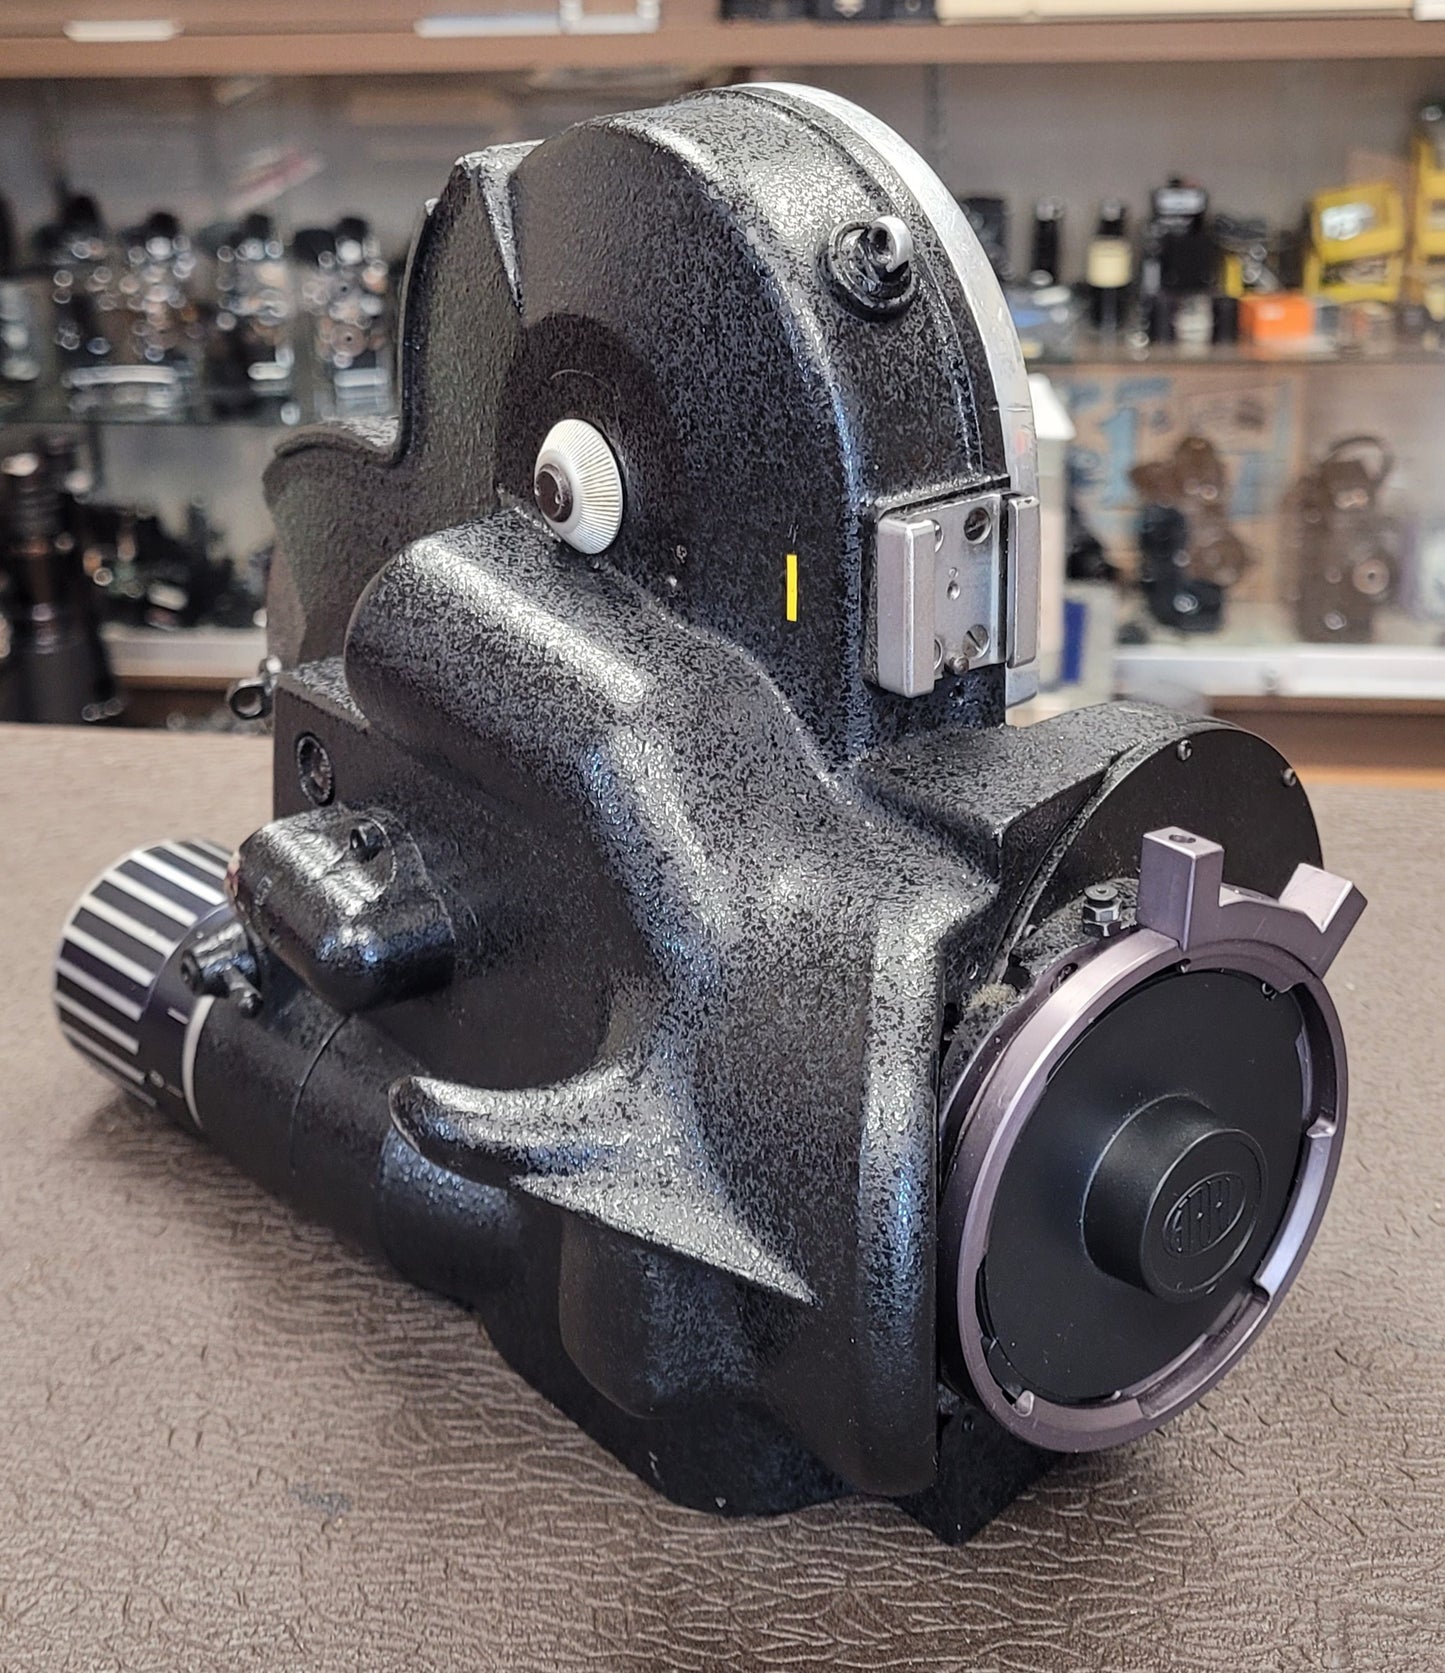 Arri S Super 16mm PL mount Camera Body with eyepiece S# 18077